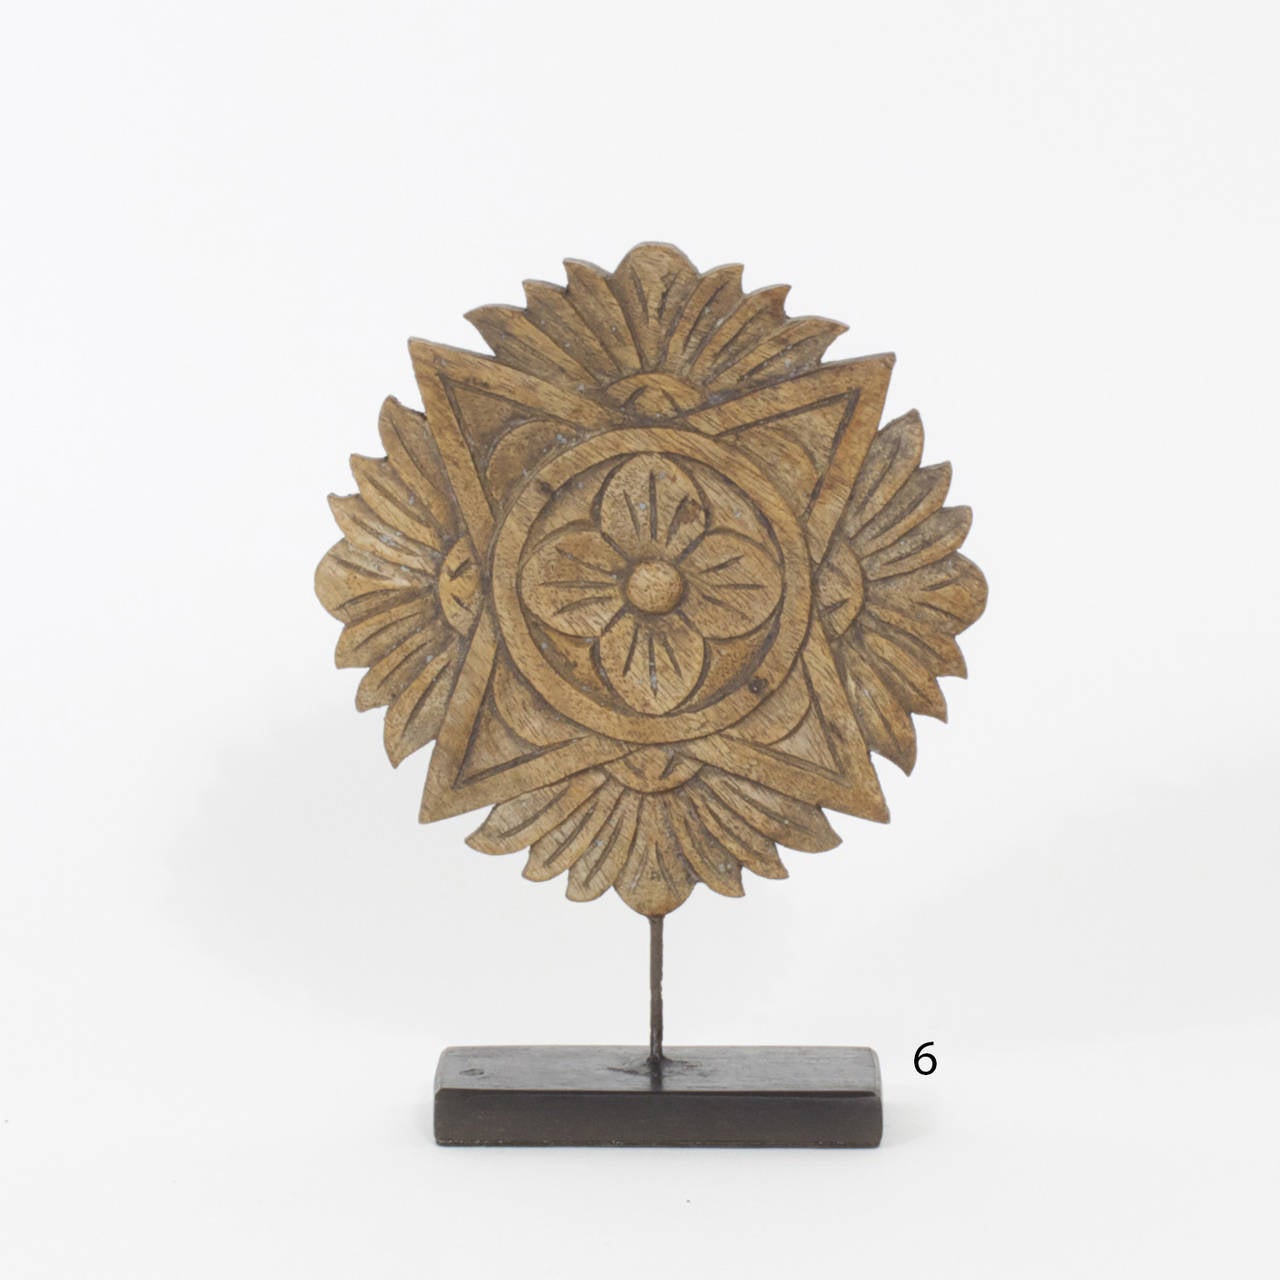 Intriguing group of four architectural fragments in an assortment of sizes, shapes and tones. Each fragment is individually mounted on a wooden base to showcase the nature of the carving and the depth of the patina. These Indian carvings work well